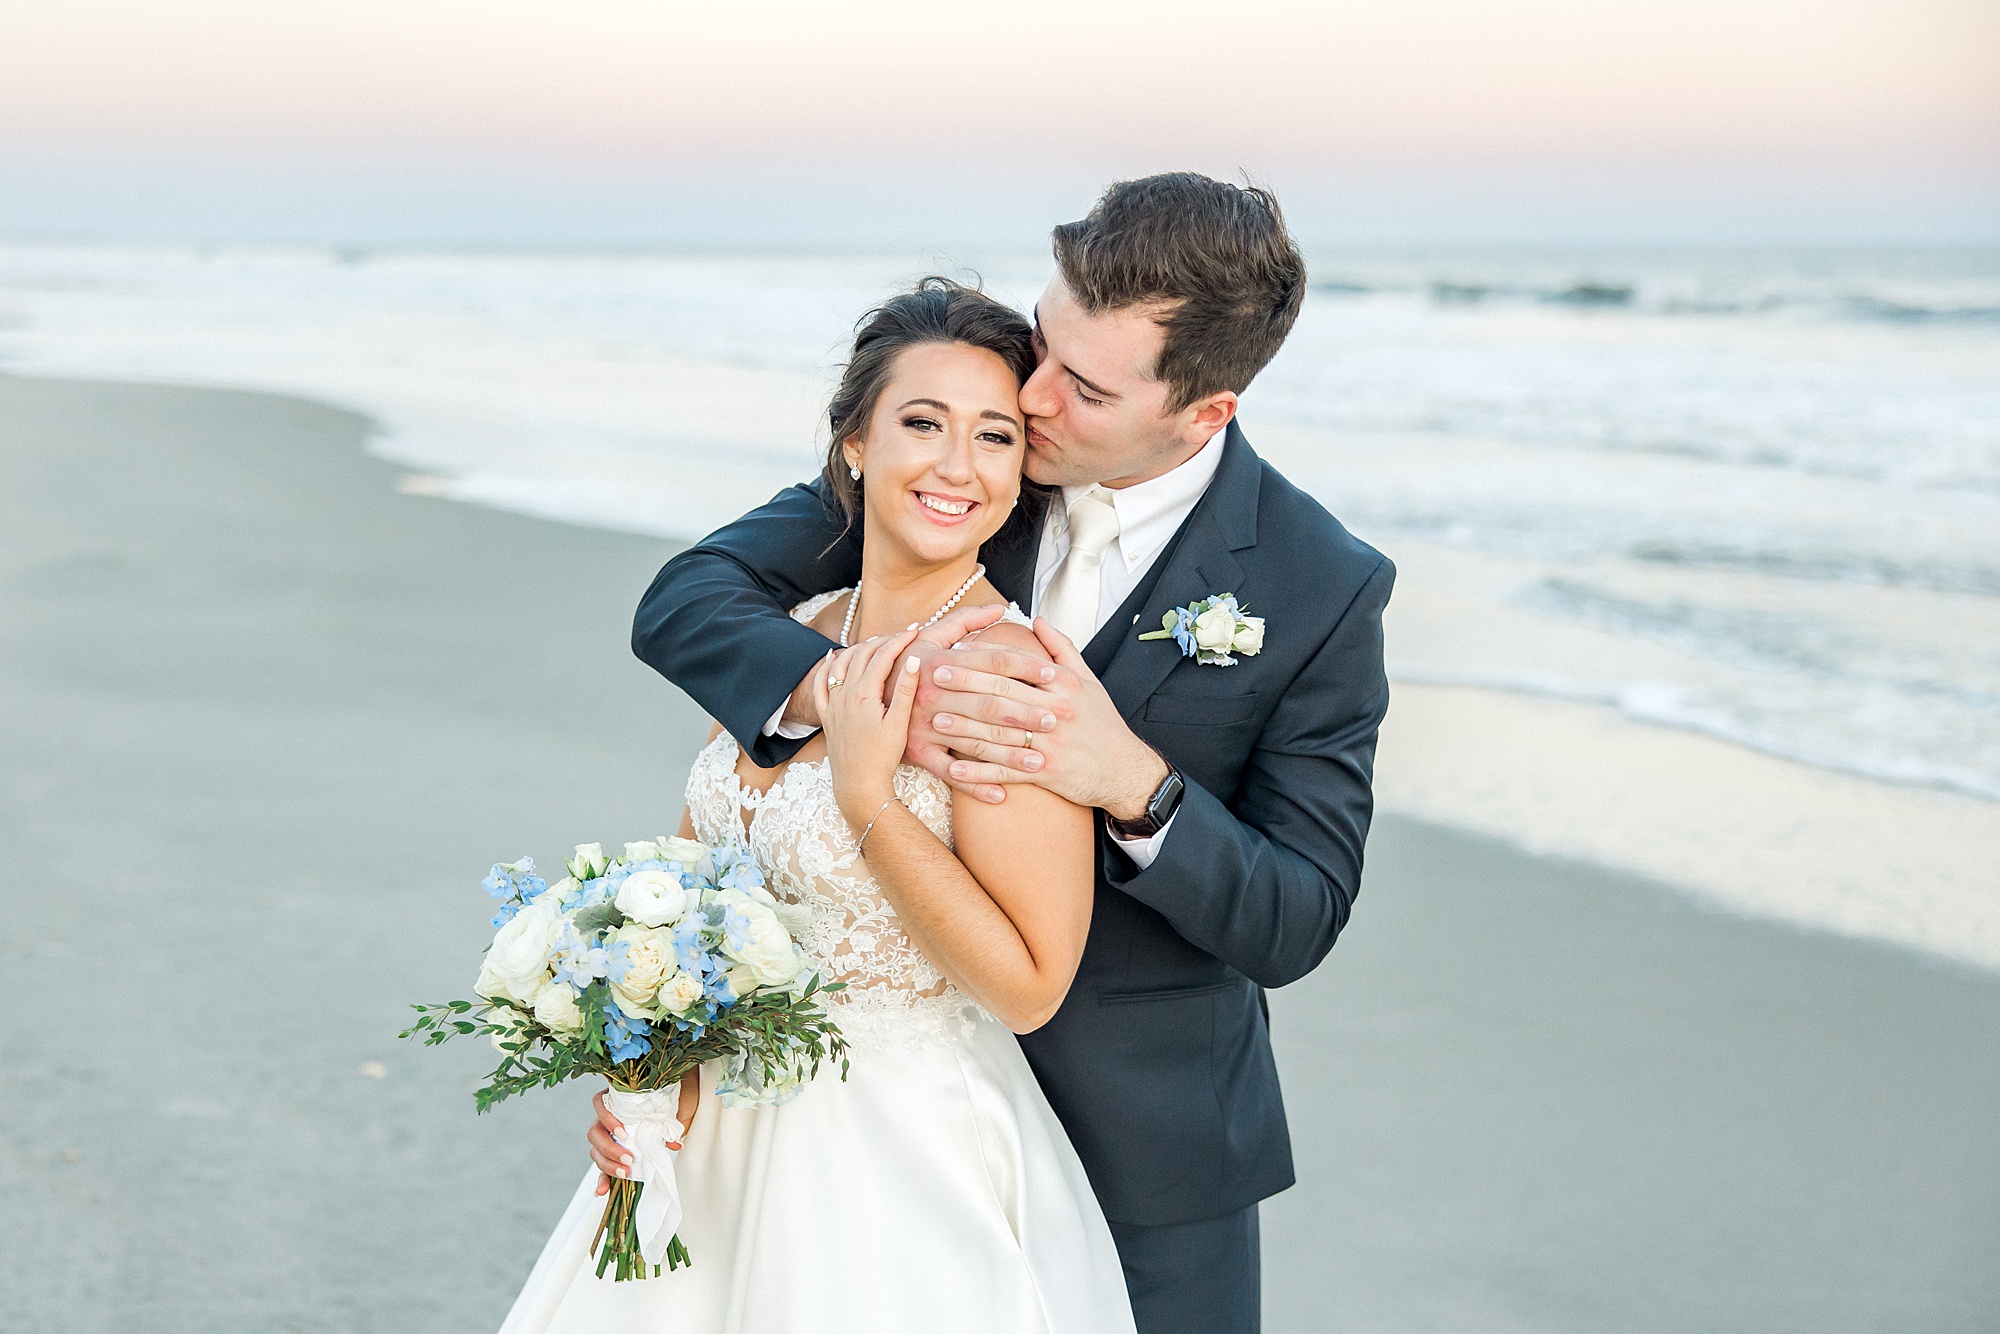 husband kisses his new bride on the beach